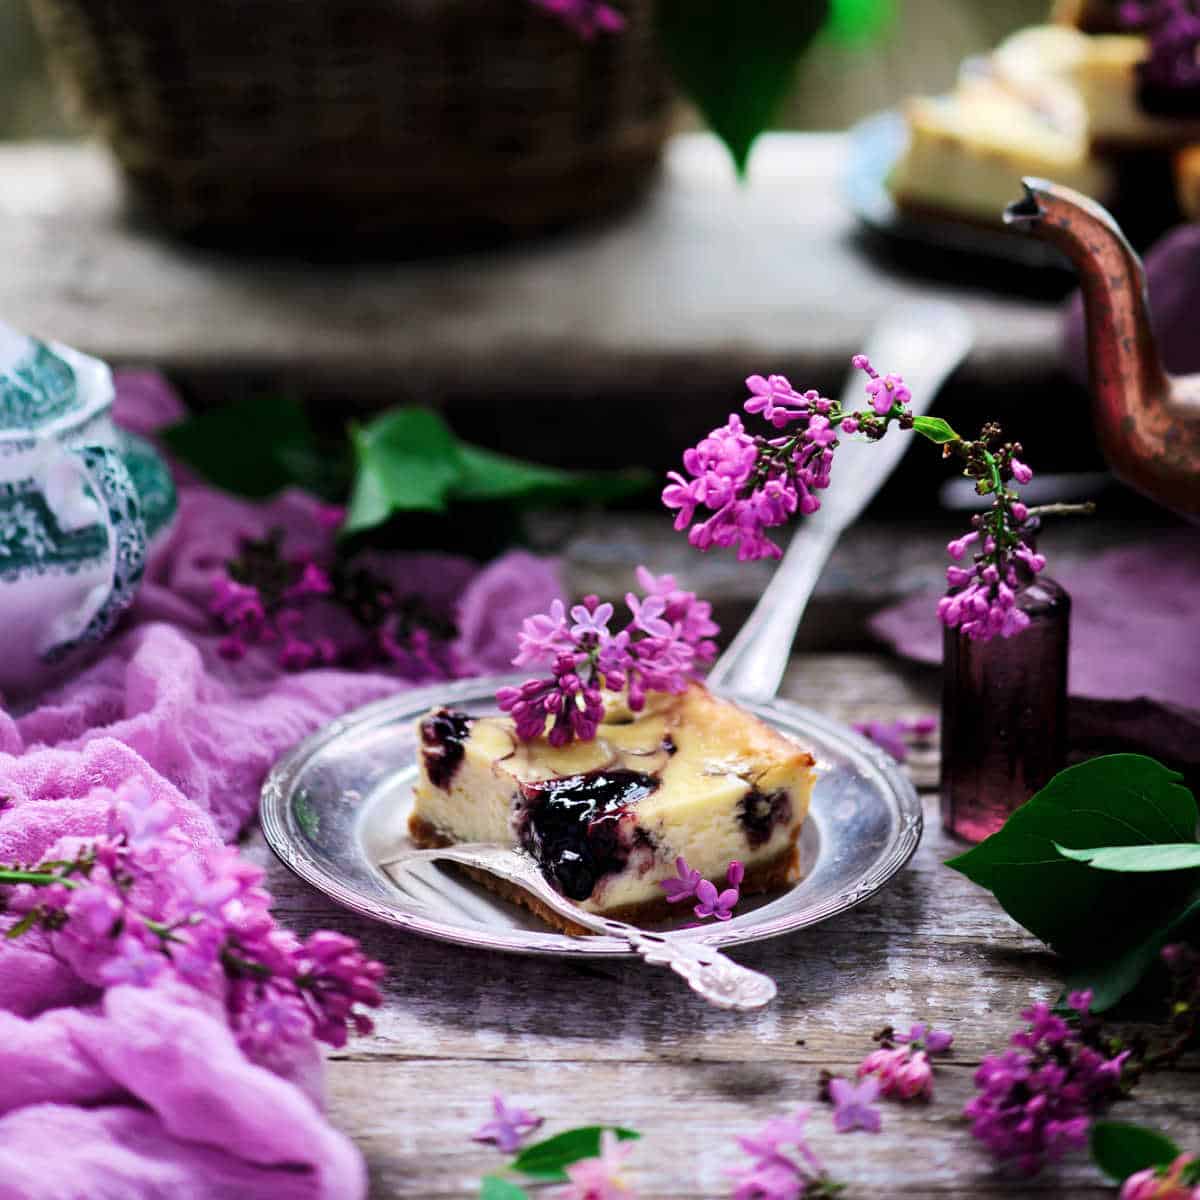 No-bake Blueberry Cheesecake Bar on a grey plate set on weathered wood table with a lavender towel next to it and lilac blossoms scattered around and on it.